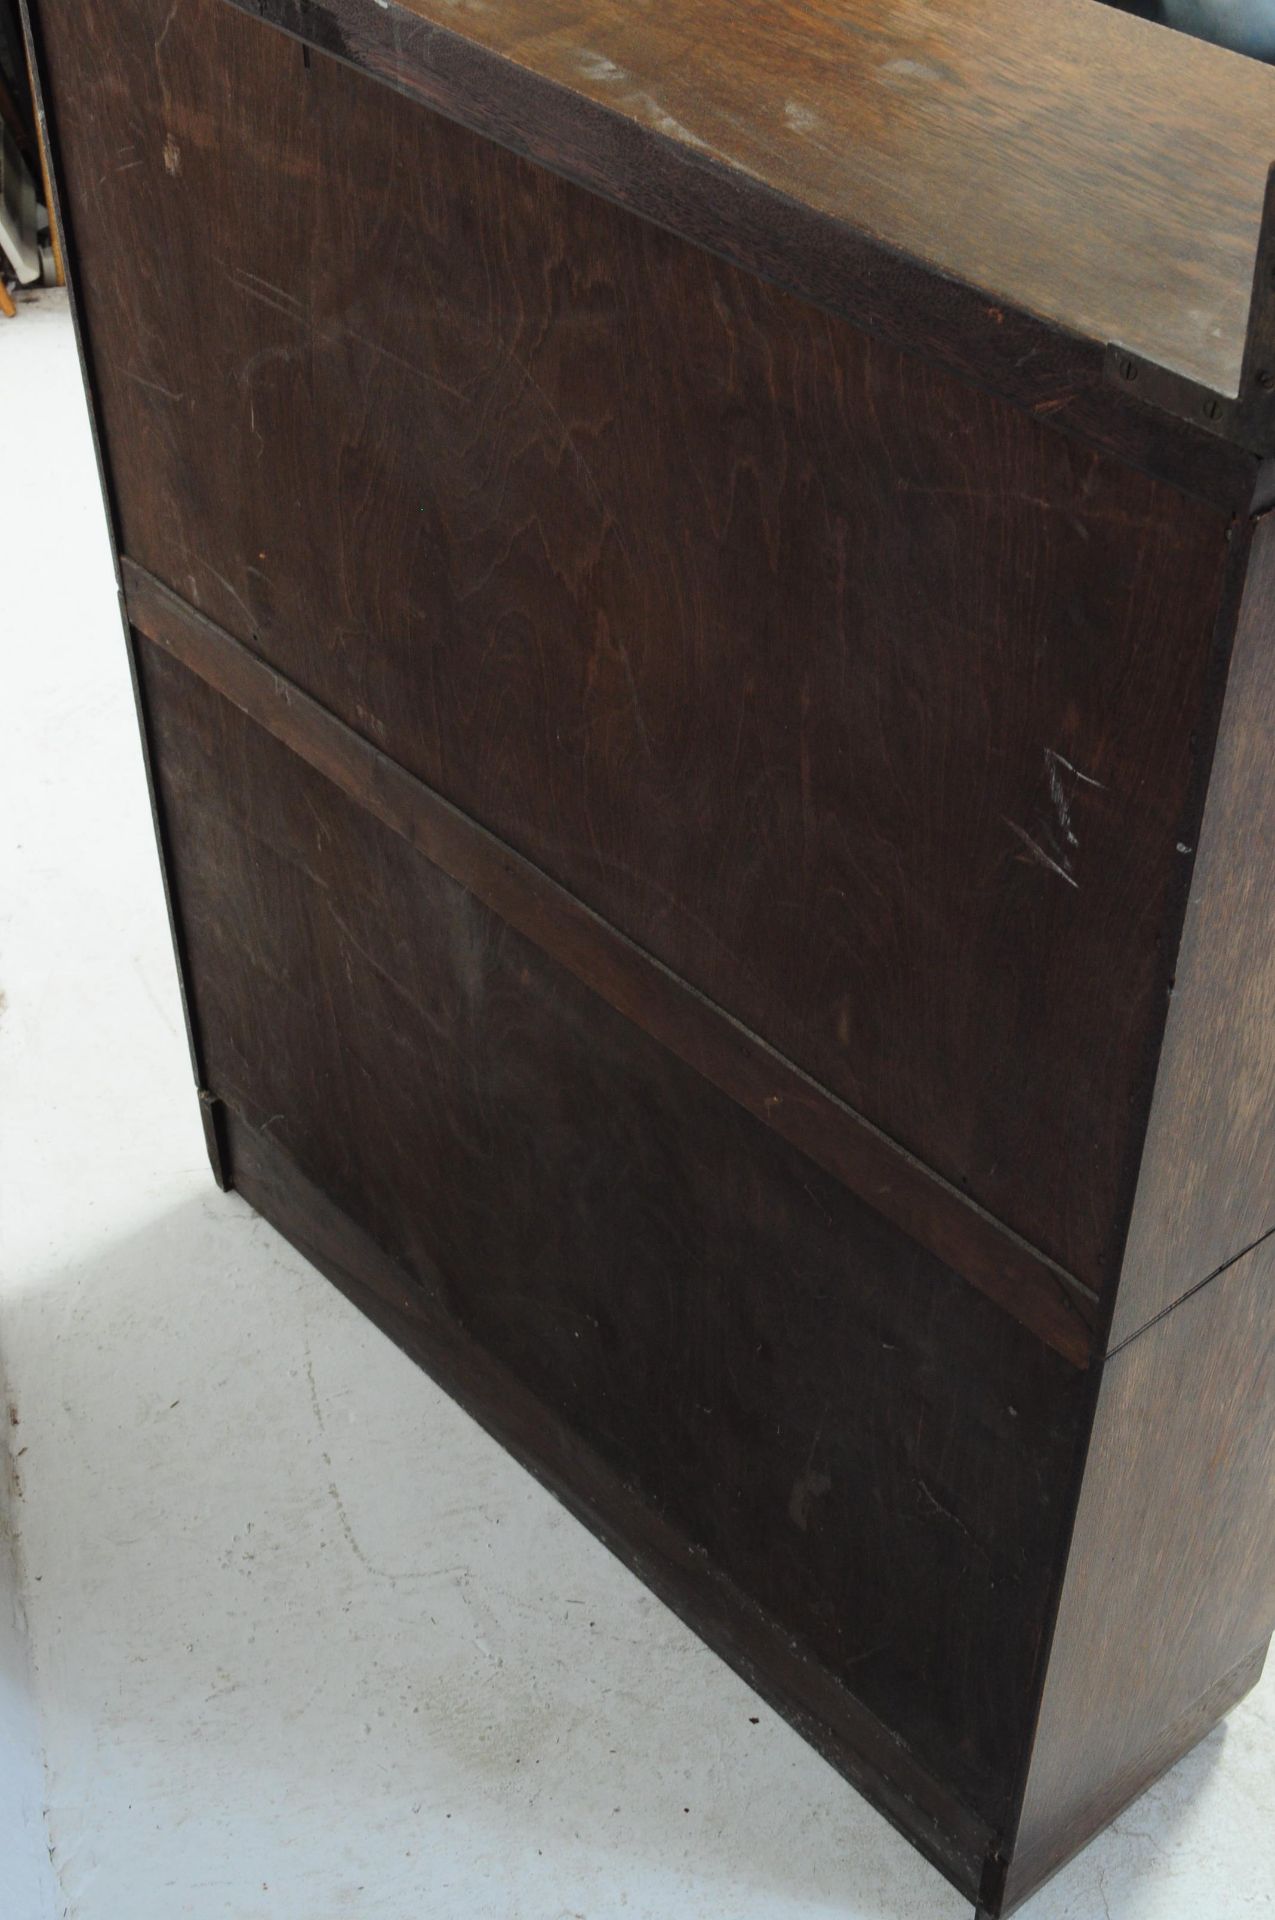 1930S ART DECO LAWYERS OAK SECTIONAL STACKING BOOKCASE - Image 5 of 5